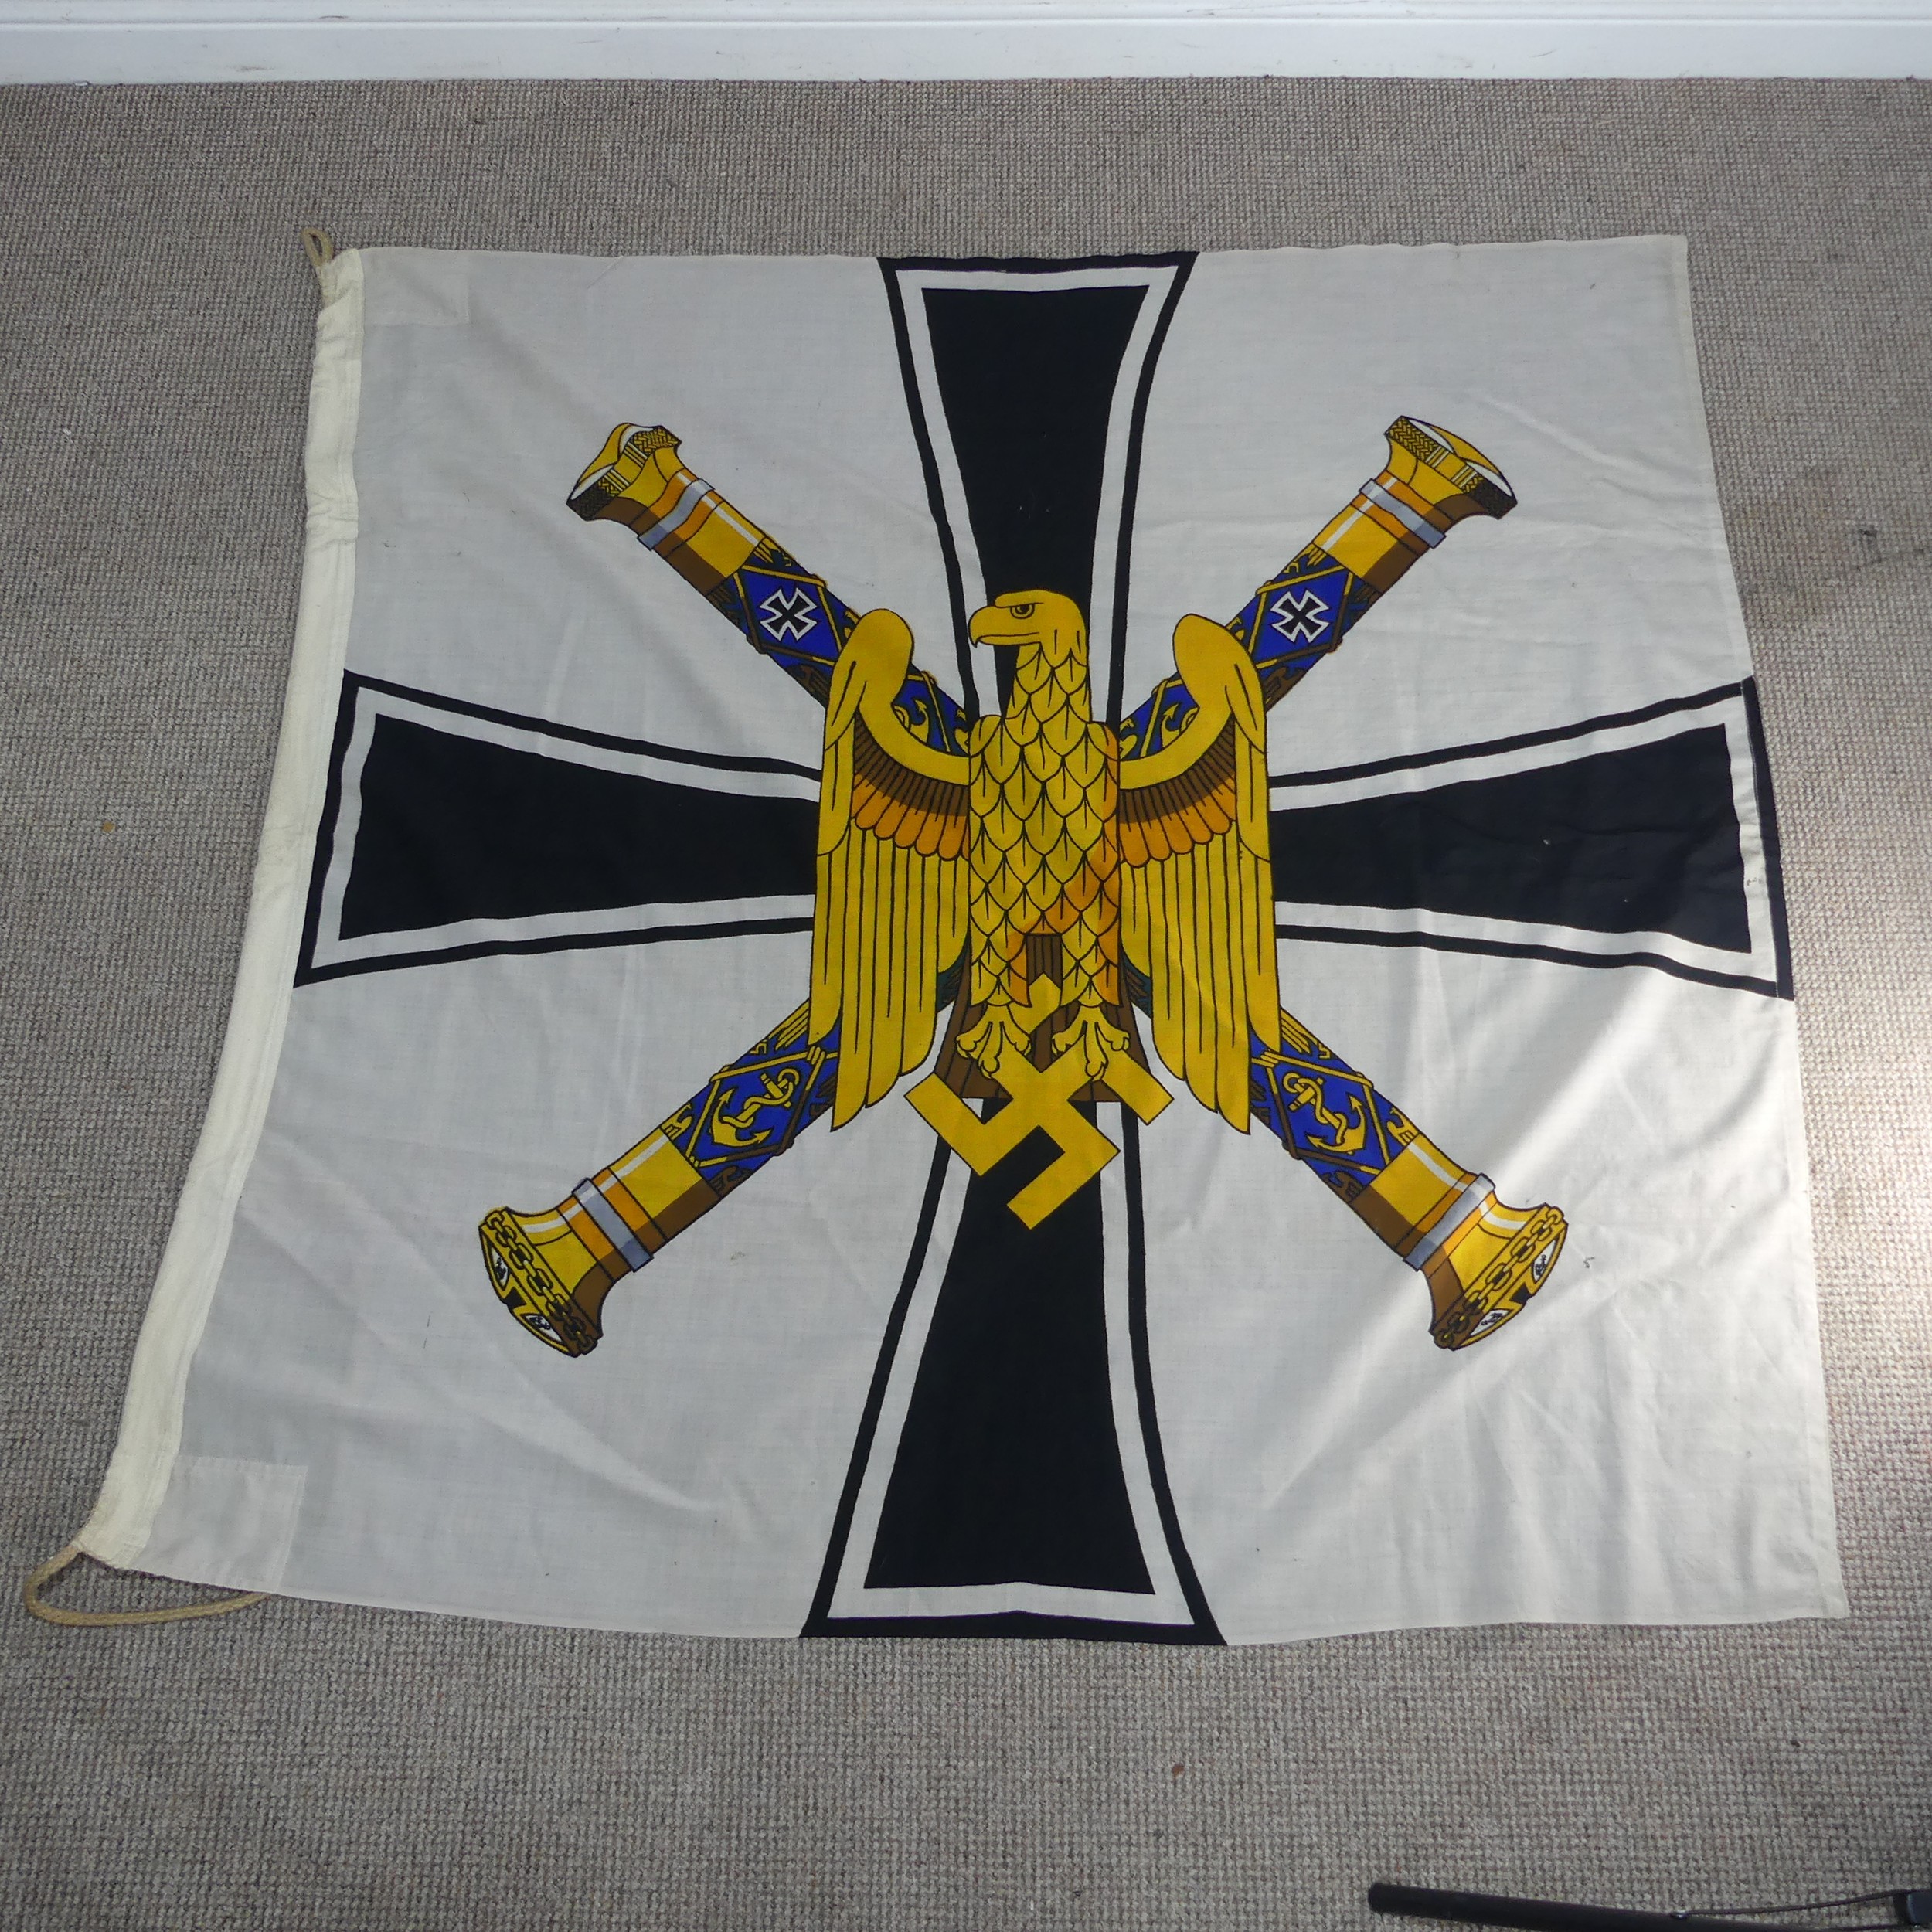 A scarce Third Reich Kriegsmarine Grand Admiral's Flag, as flown when the Grand Admiral of the - Image 5 of 6